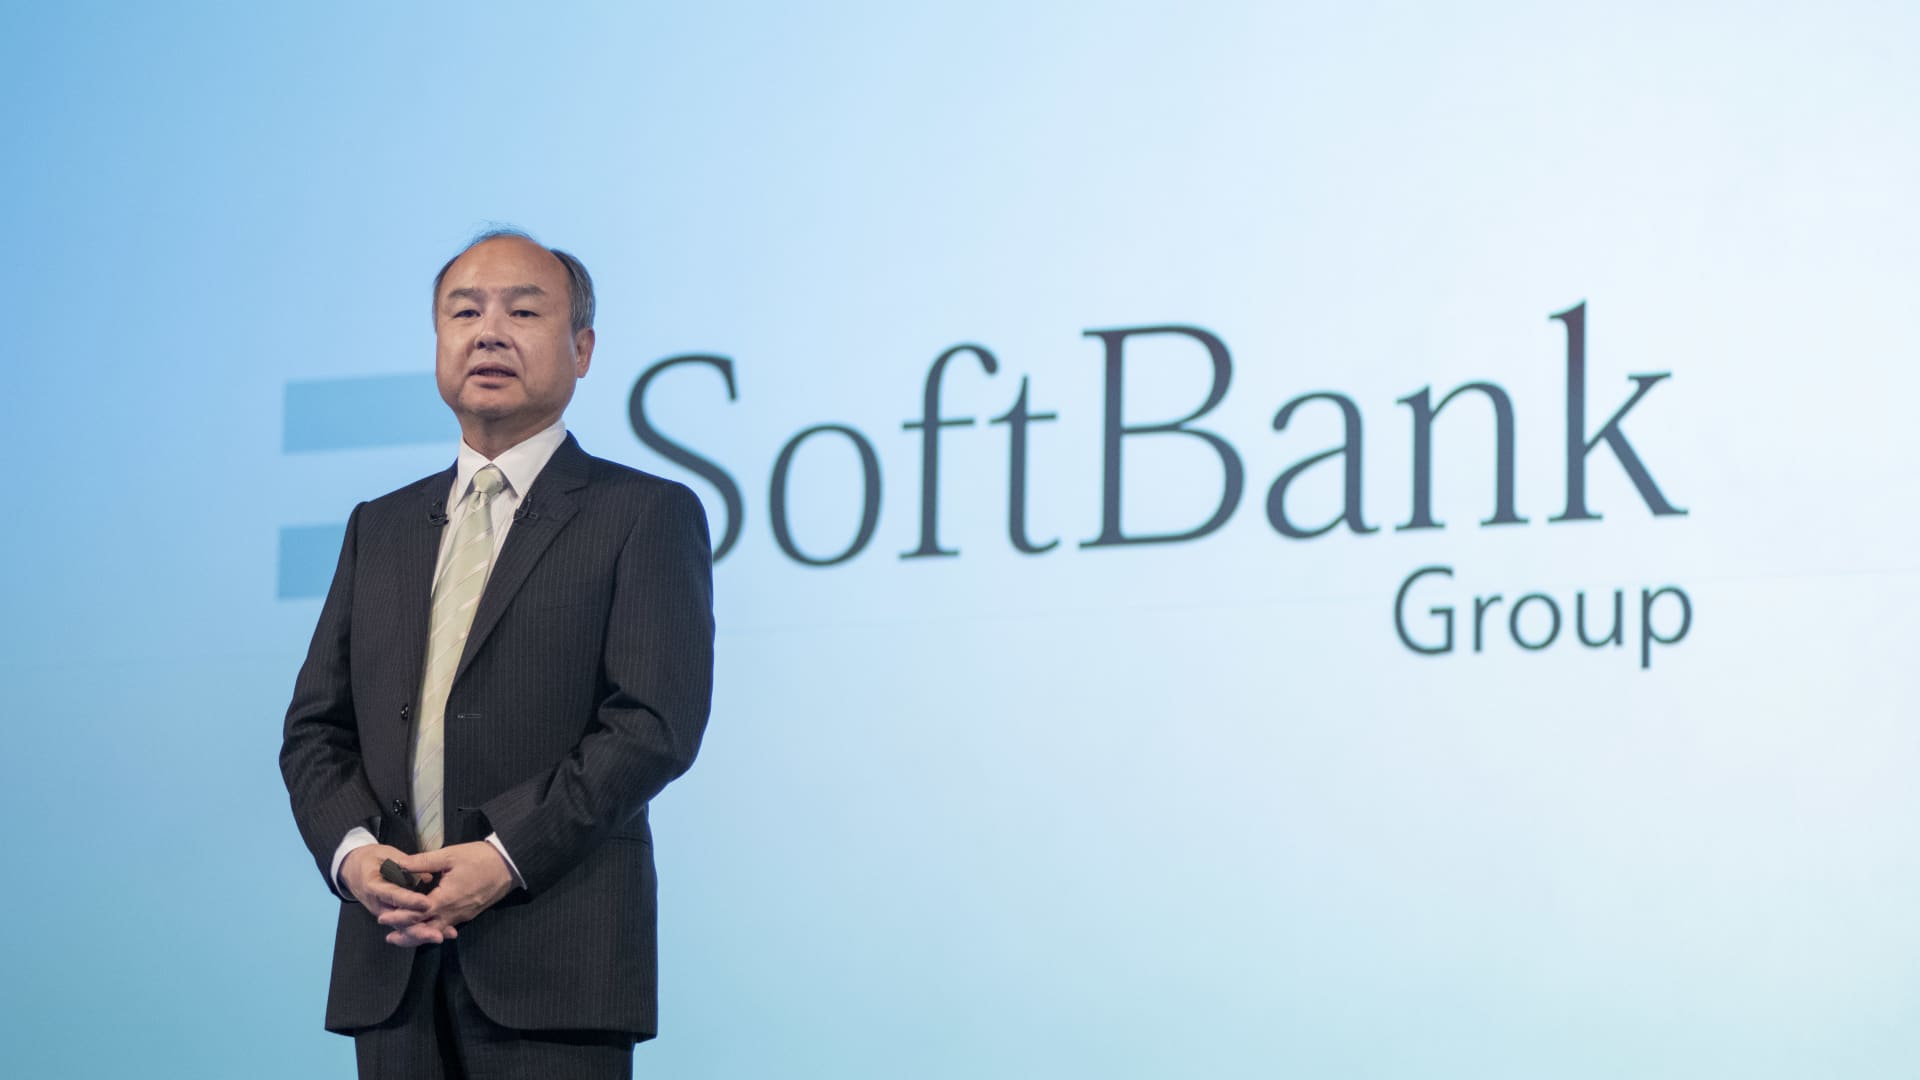 ‘Extraordinarily regrettable’: SoftBank hits back after S&P cuts credit rating further into junk